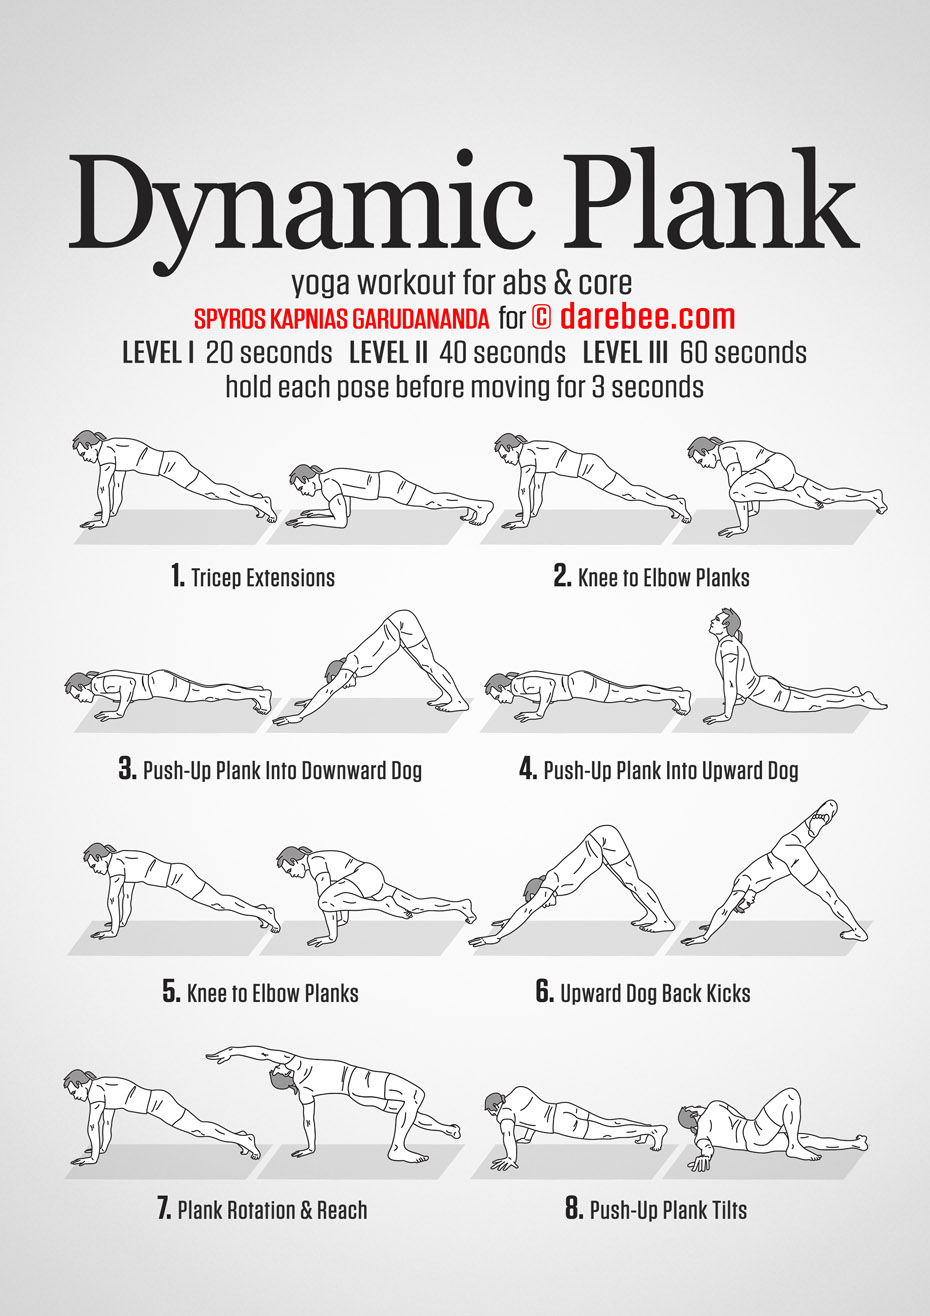 plank workout challenge